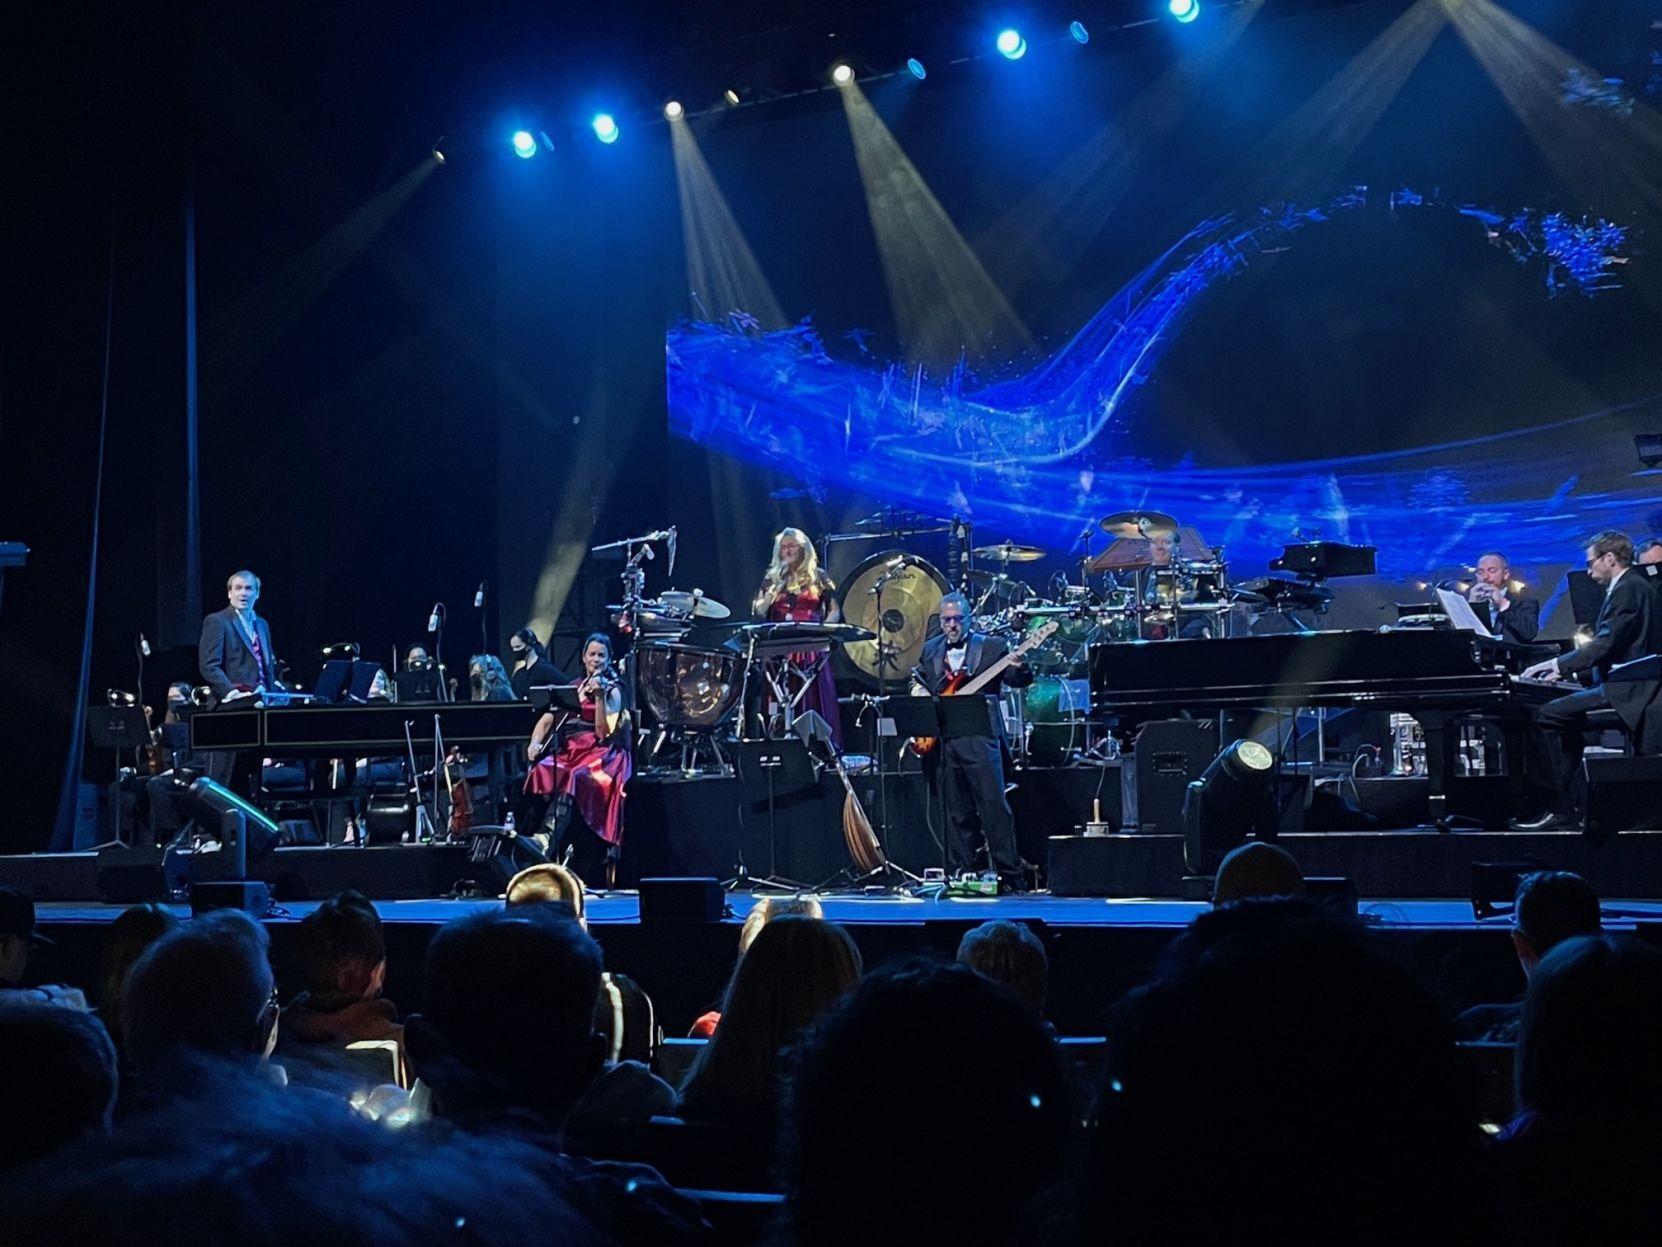 Mannheim Steamroller 2022 Schedule Review: Mannheim Steamroller's Christmas Show Digs Back In The Archives |  Music | Siouxcityjournal.com